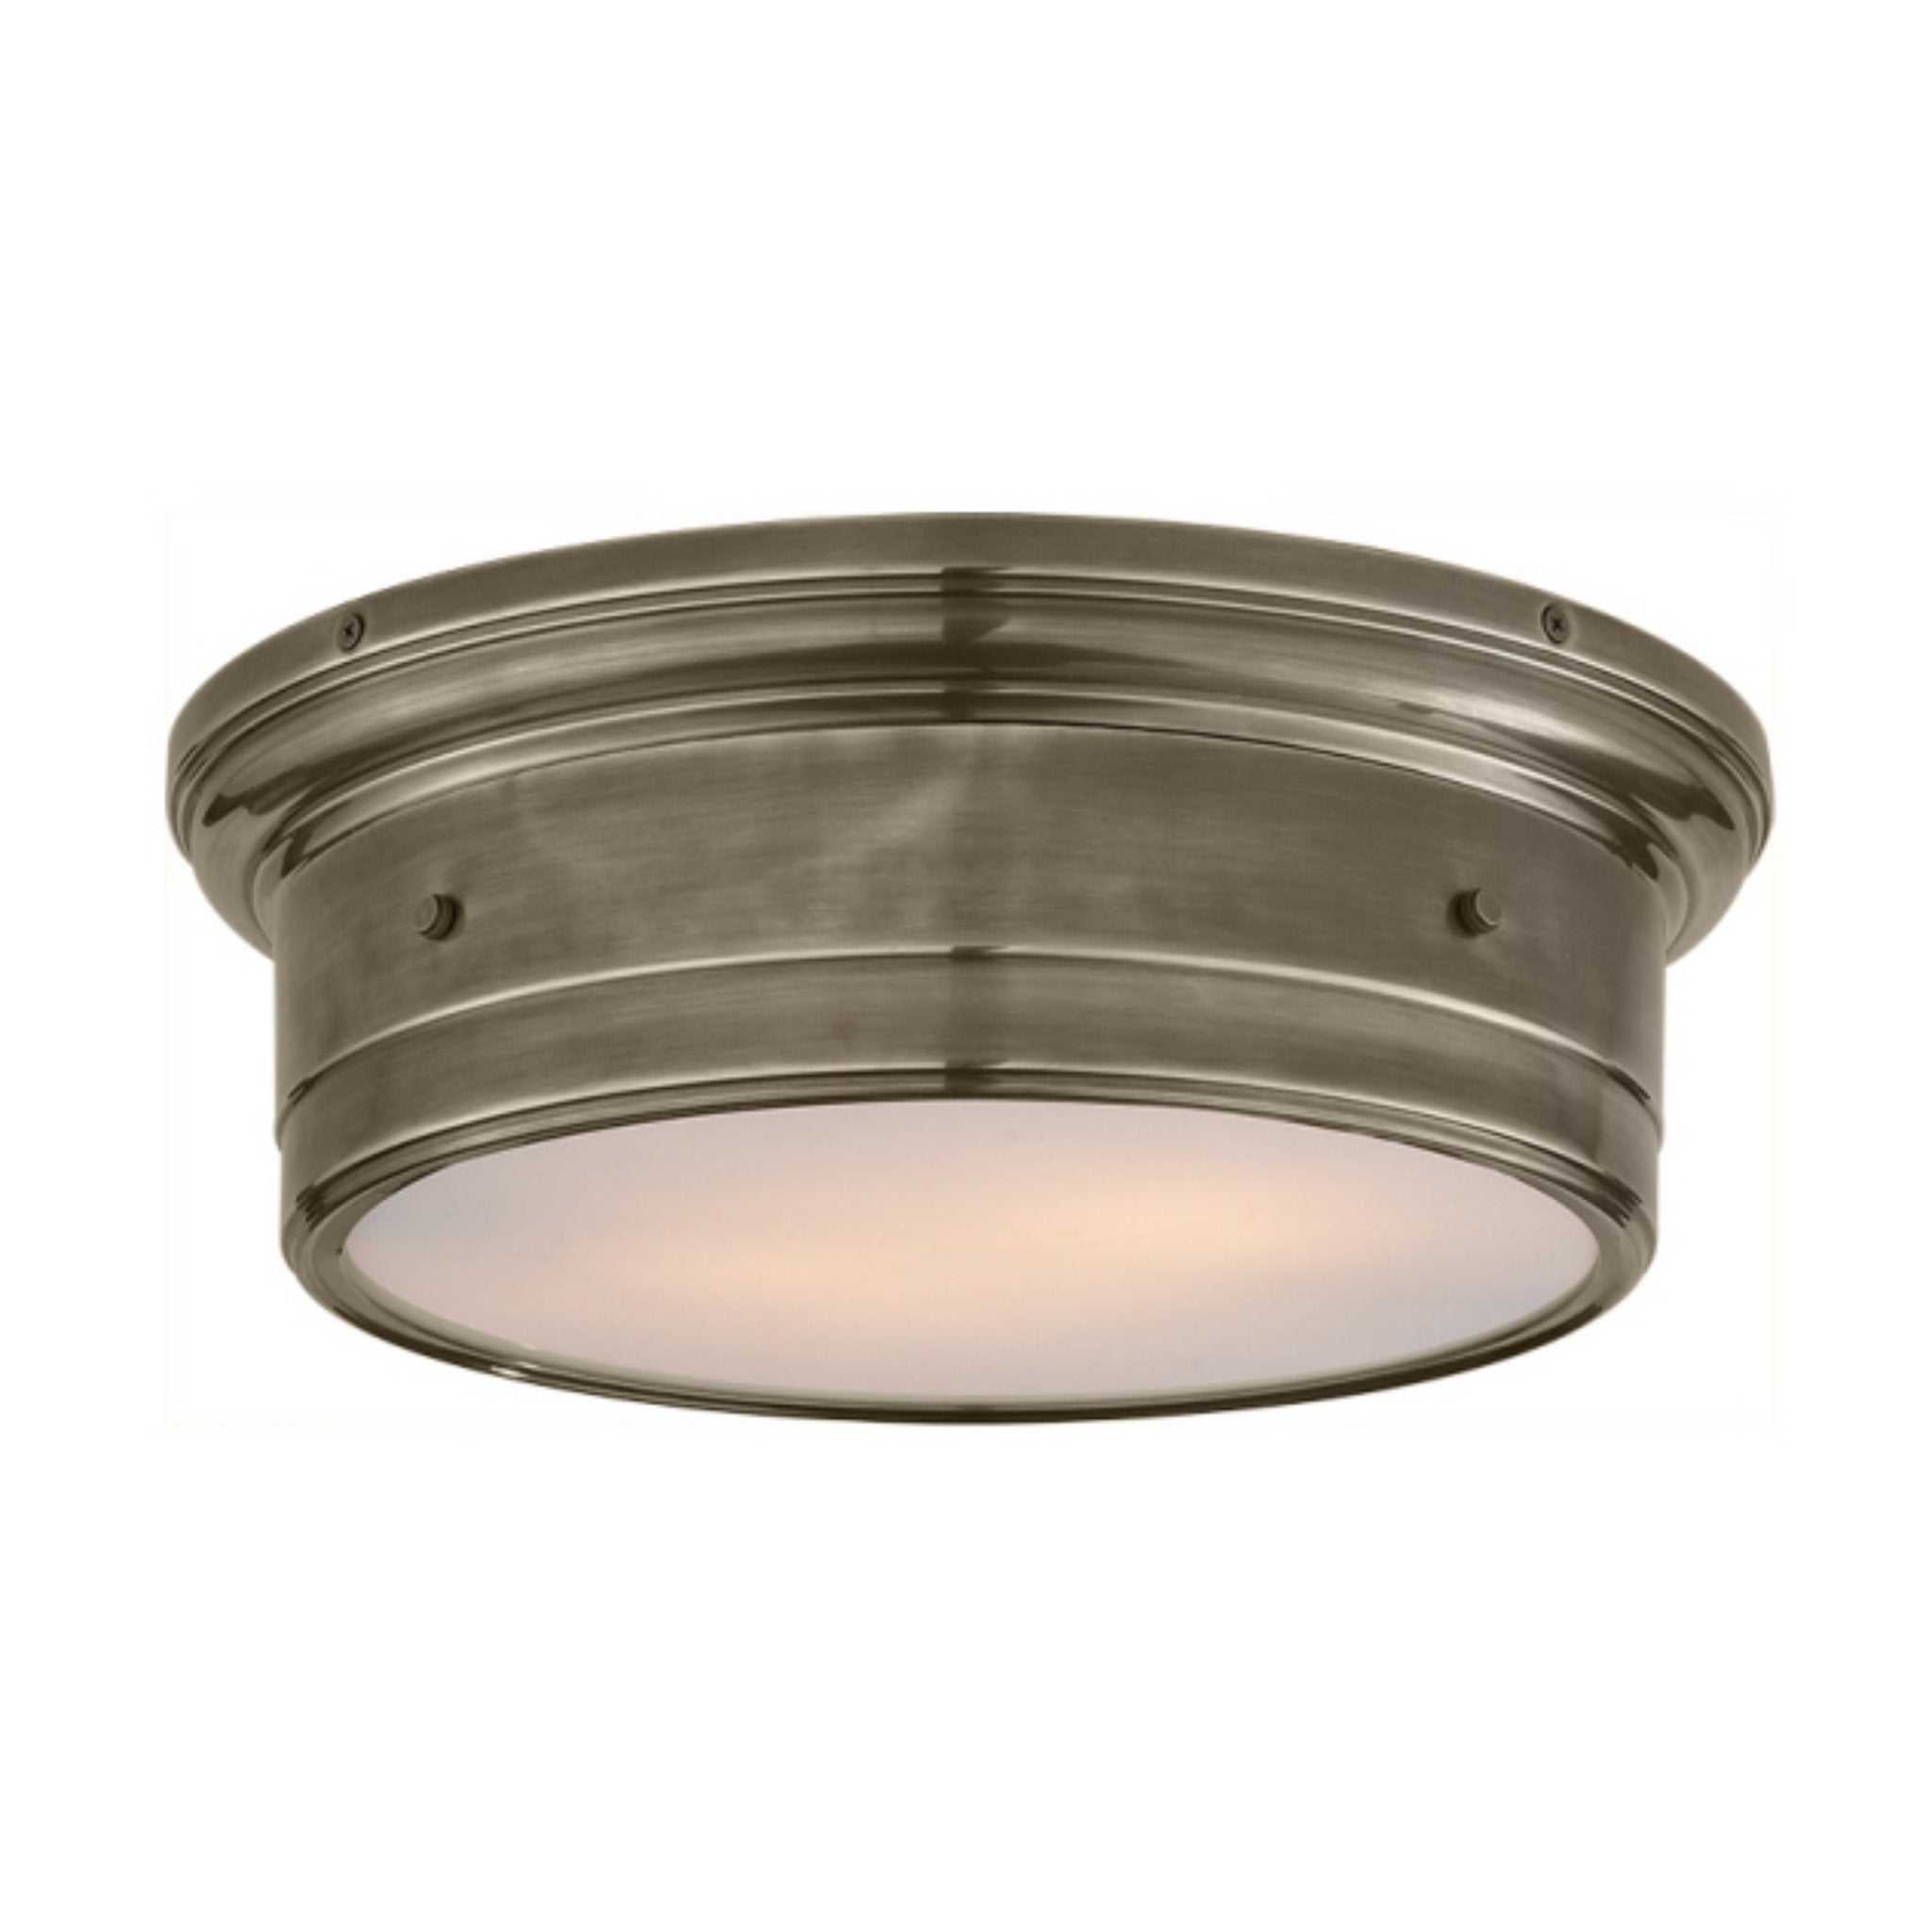 Visual Comfort Siena Large Flush Mount in Antique Nickel with White Glass